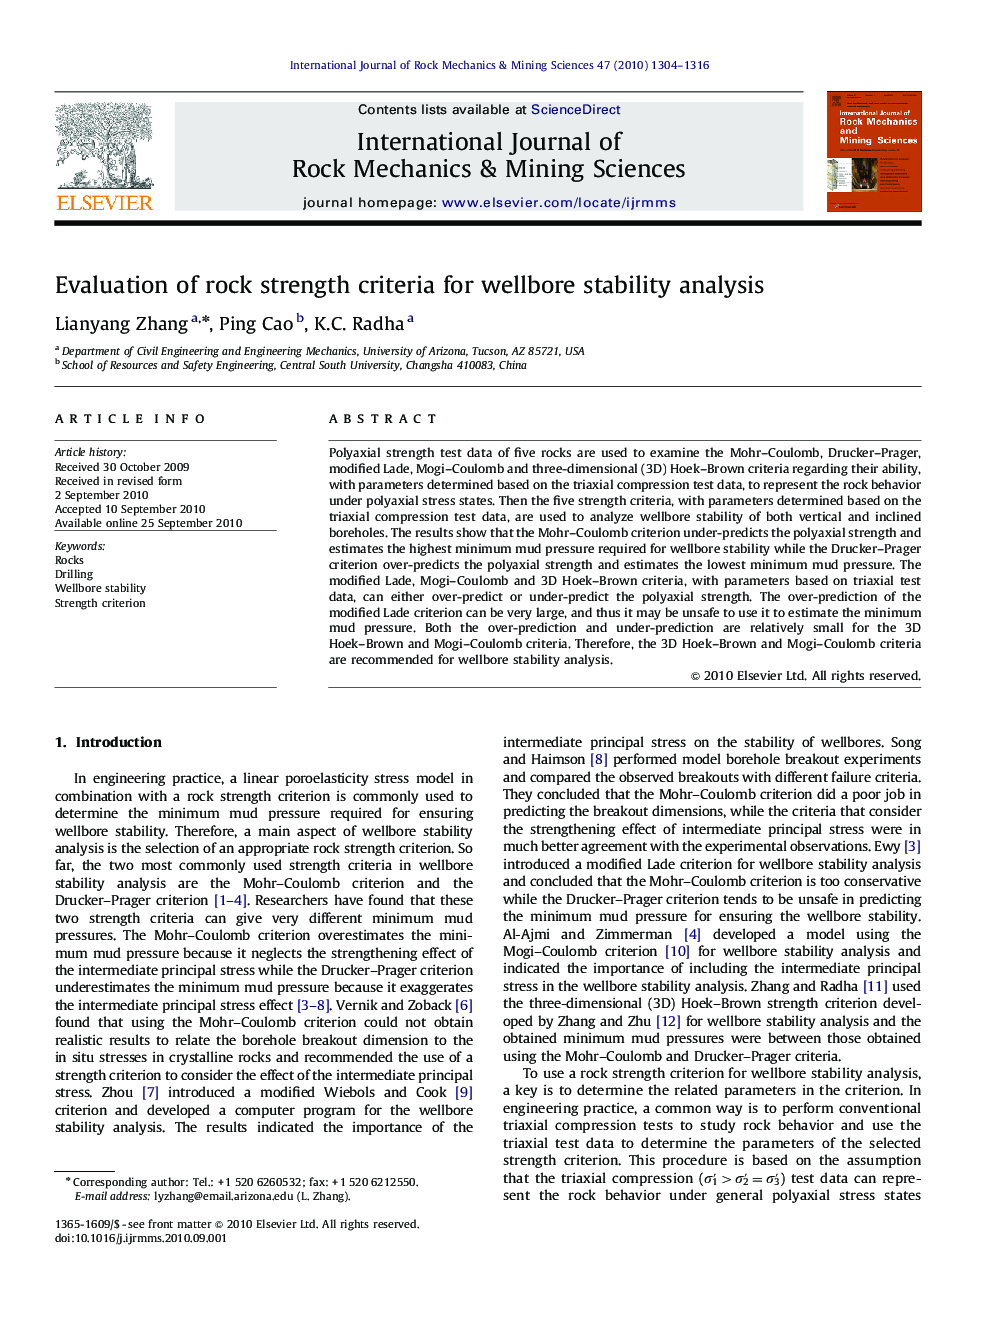 Evaluation of rock strength criteria for wellbore stability analysis